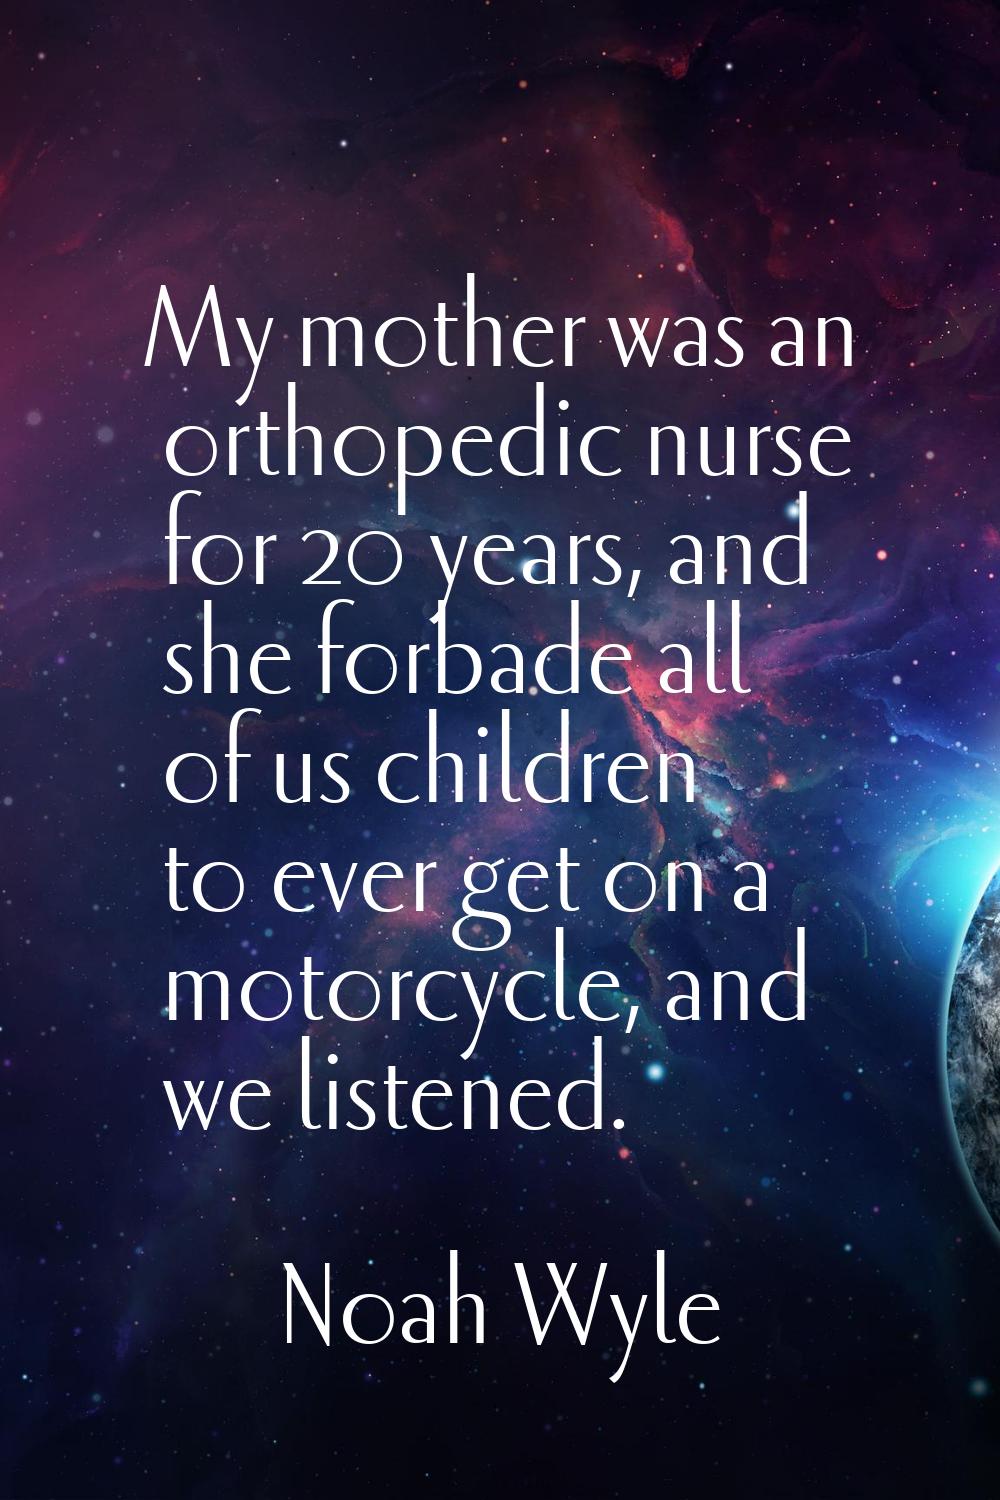 My mother was an orthopedic nurse for 20 years, and she forbade all of us children to ever get on a